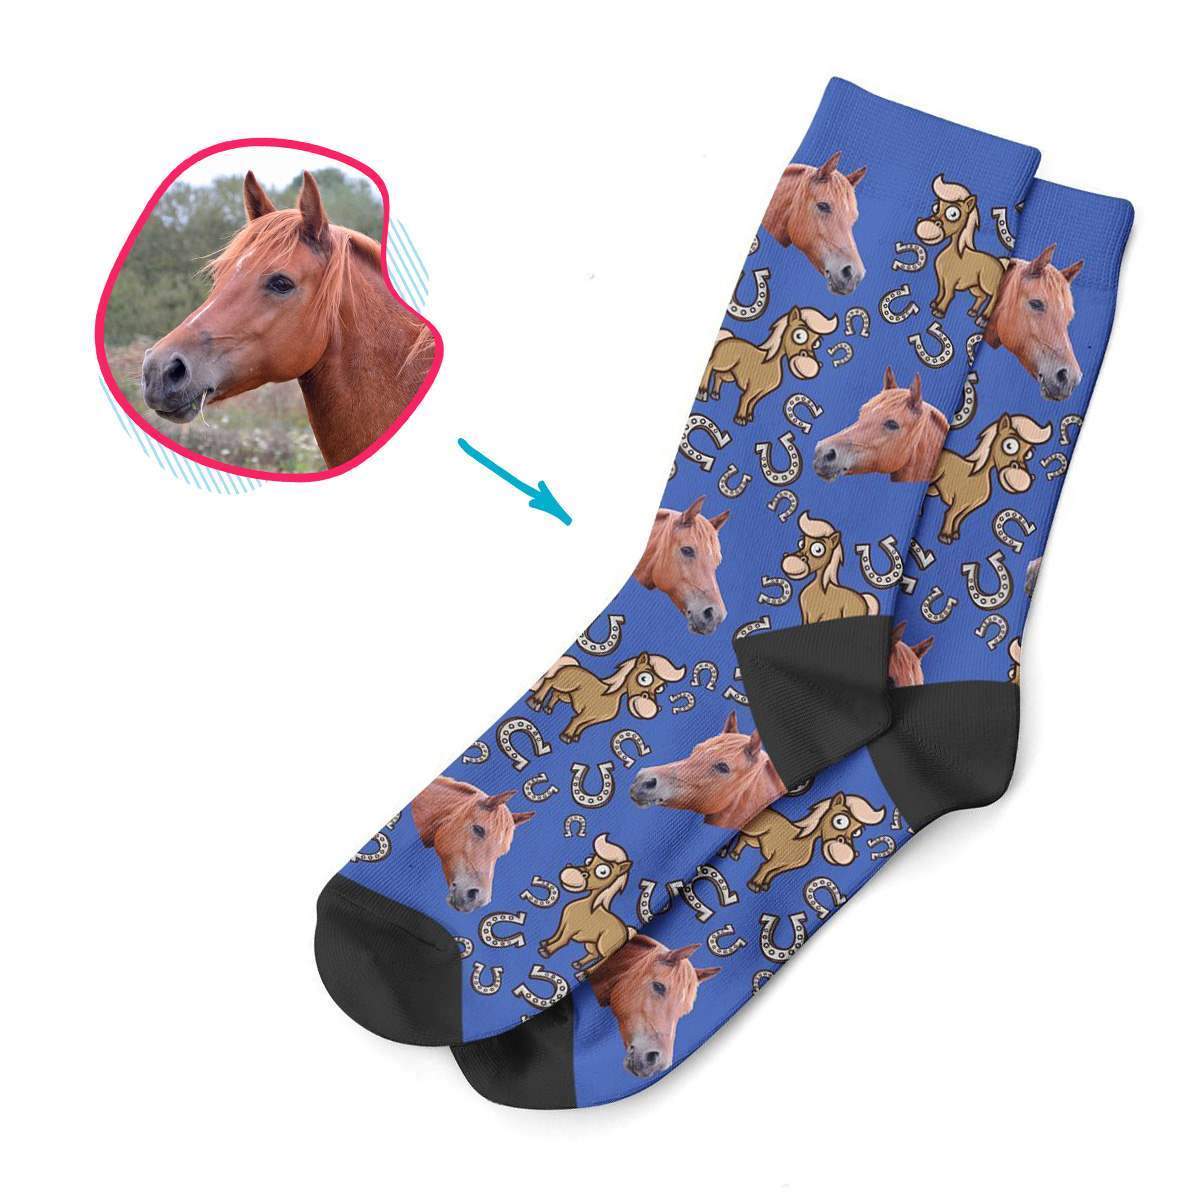 darkblue Horse socks personalized with photo of face printed on them